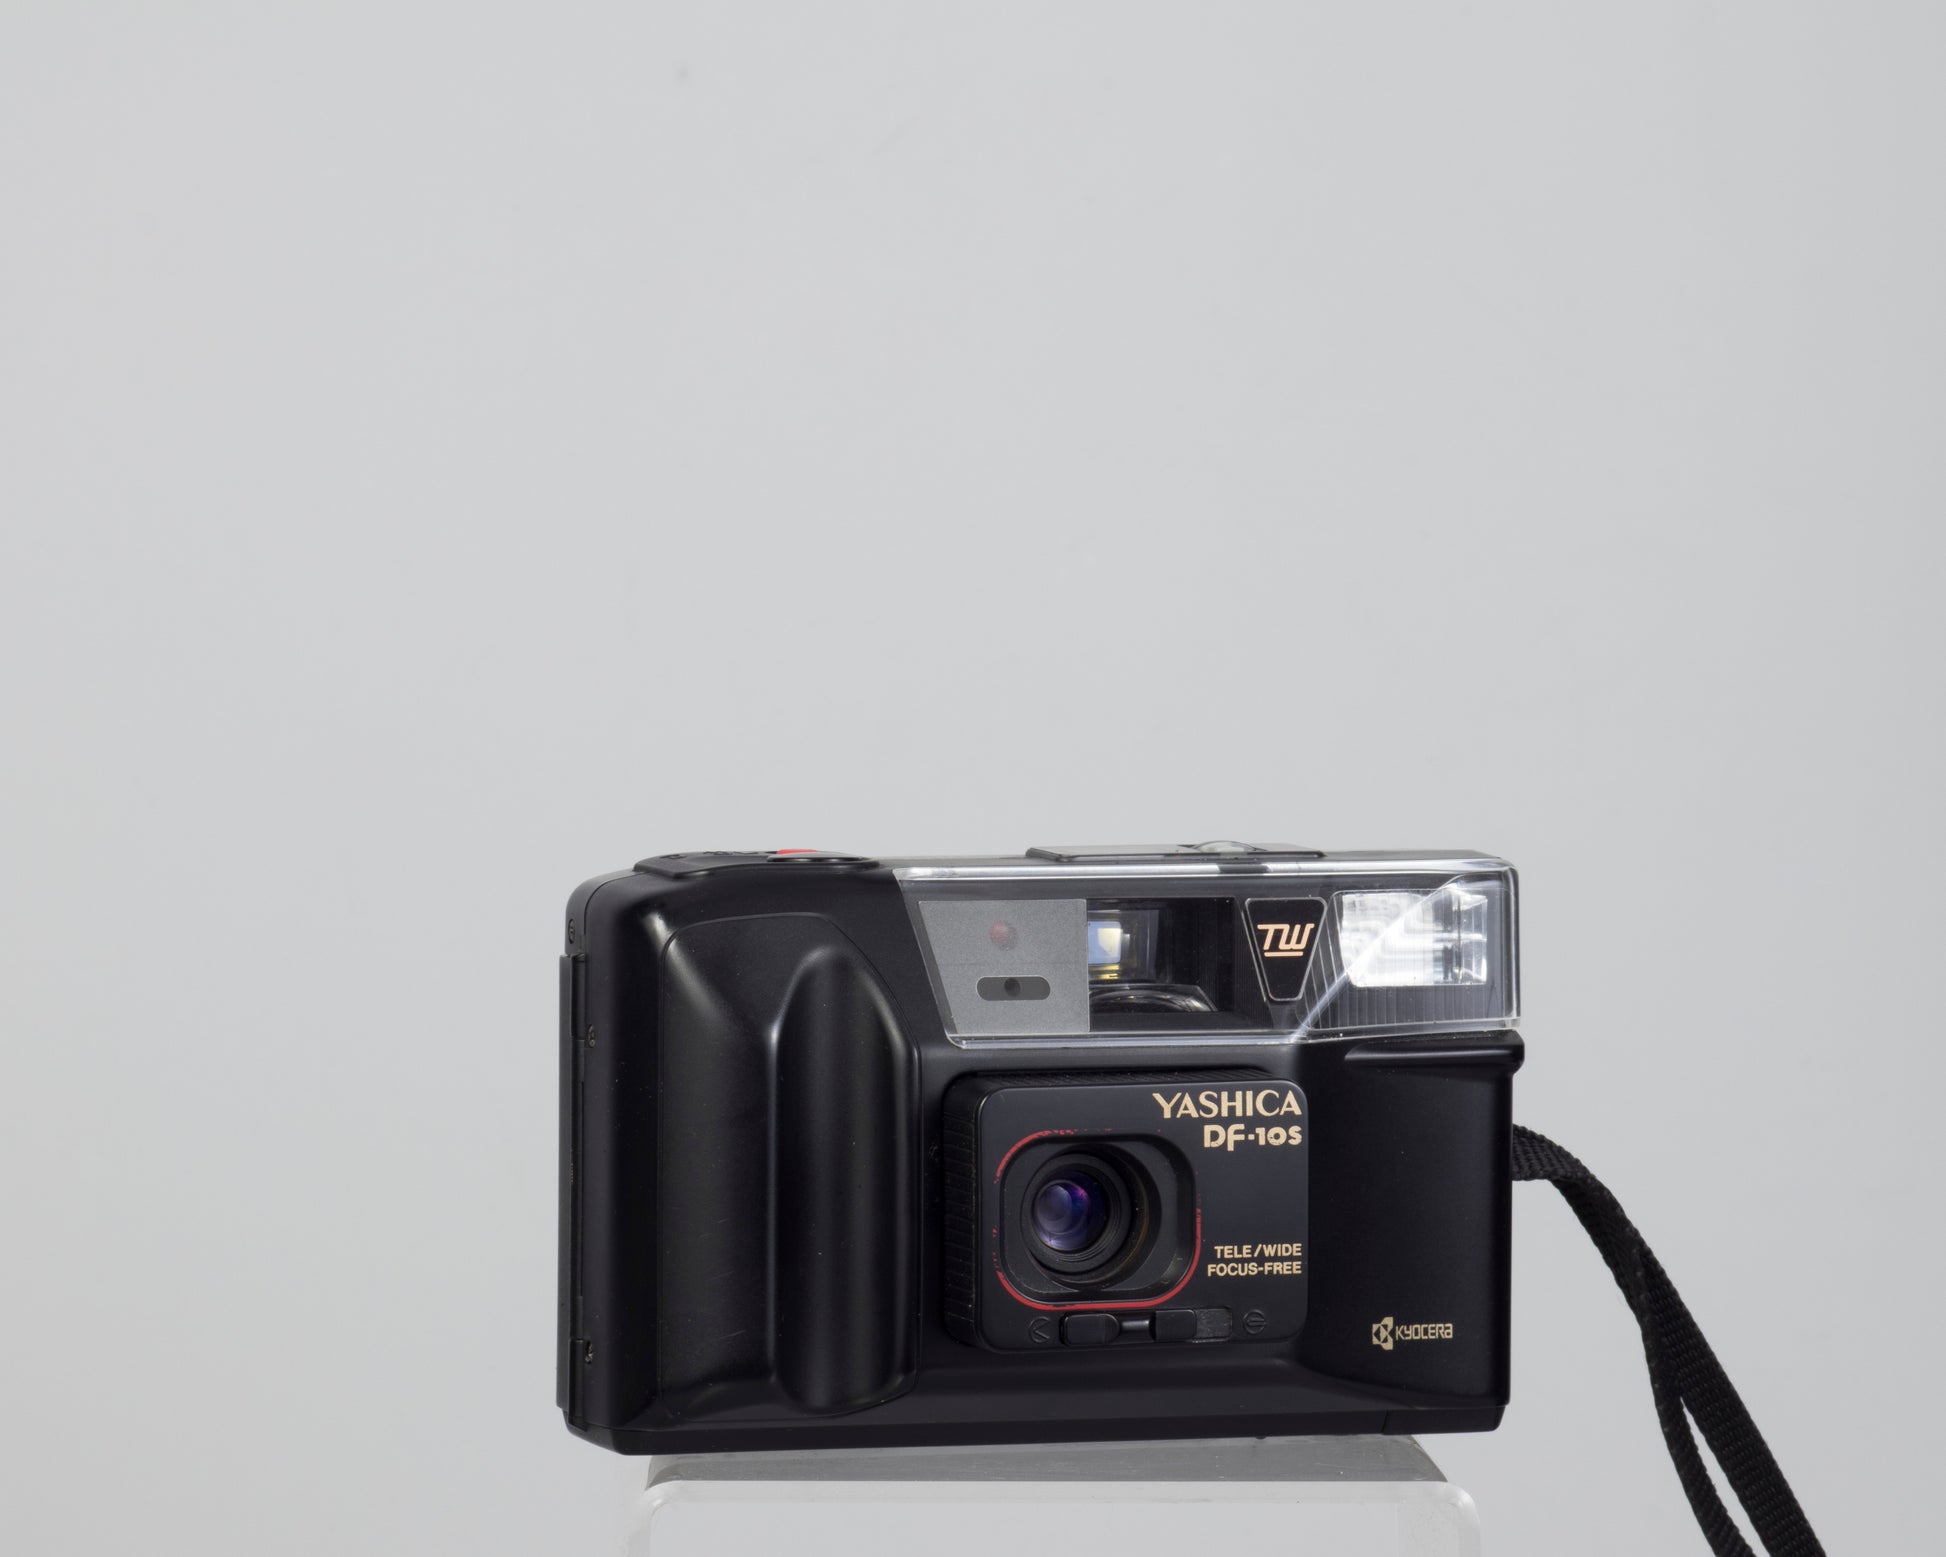 The Yashica DF-10S is a twin-lens 35mm point-and-shoot from the late 1980s